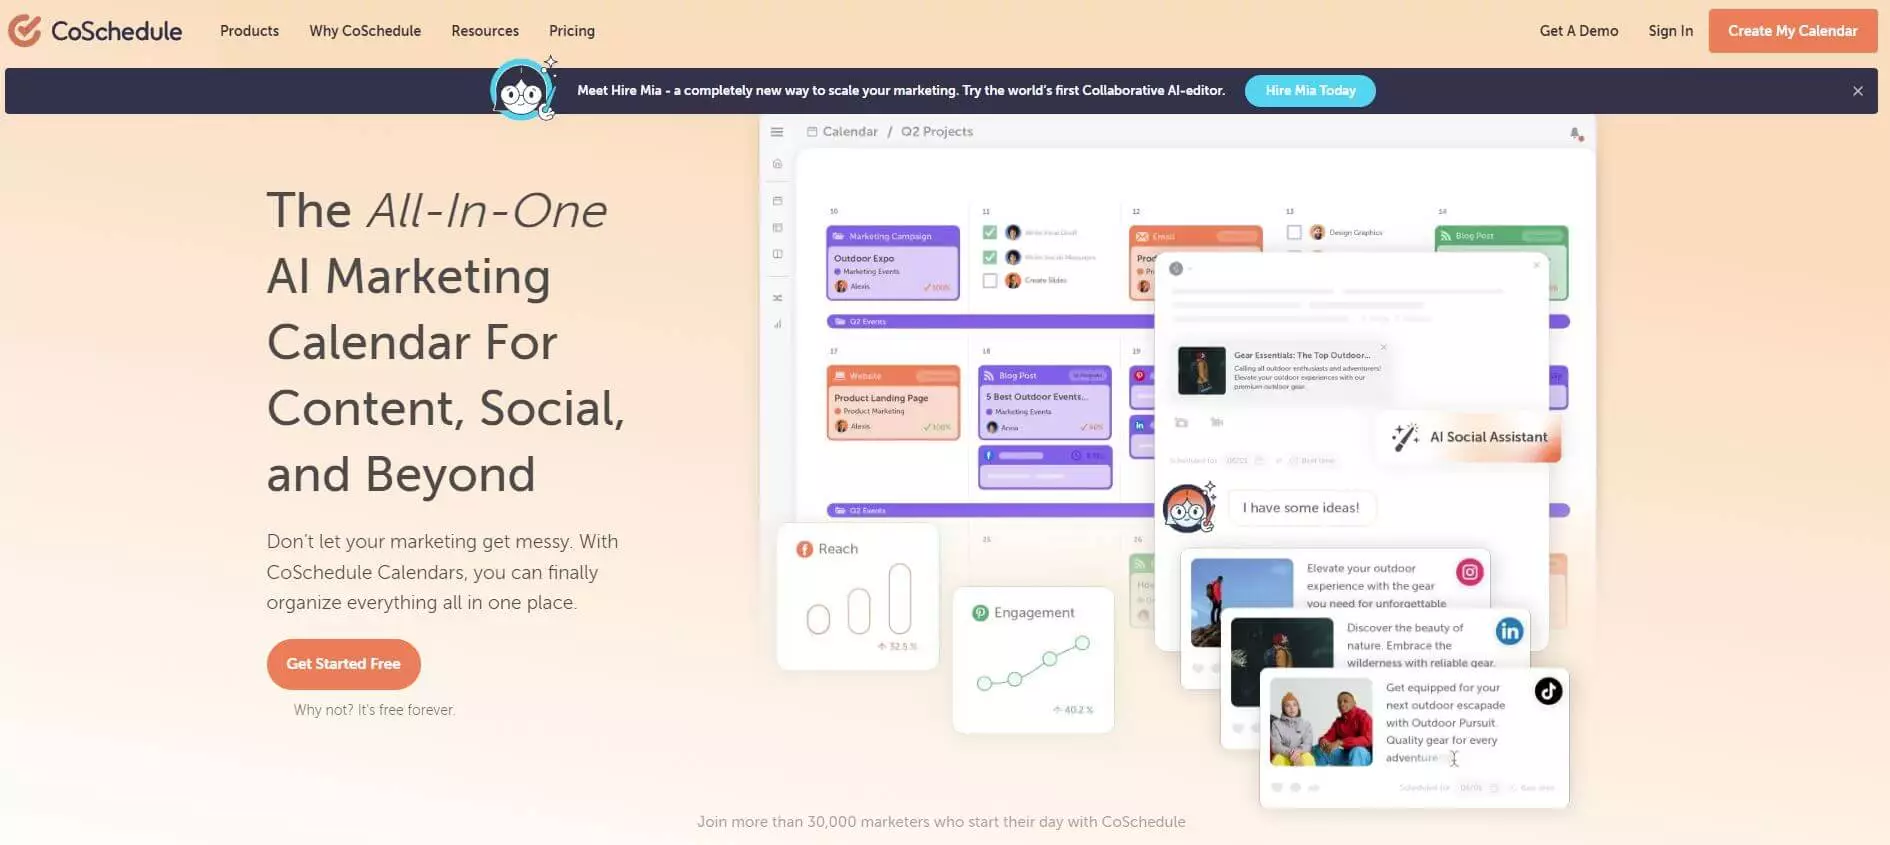 CoSchedule homepage promoting their all-in-one AI marketing calendar for content and social media management with various features and a call-to-action button.